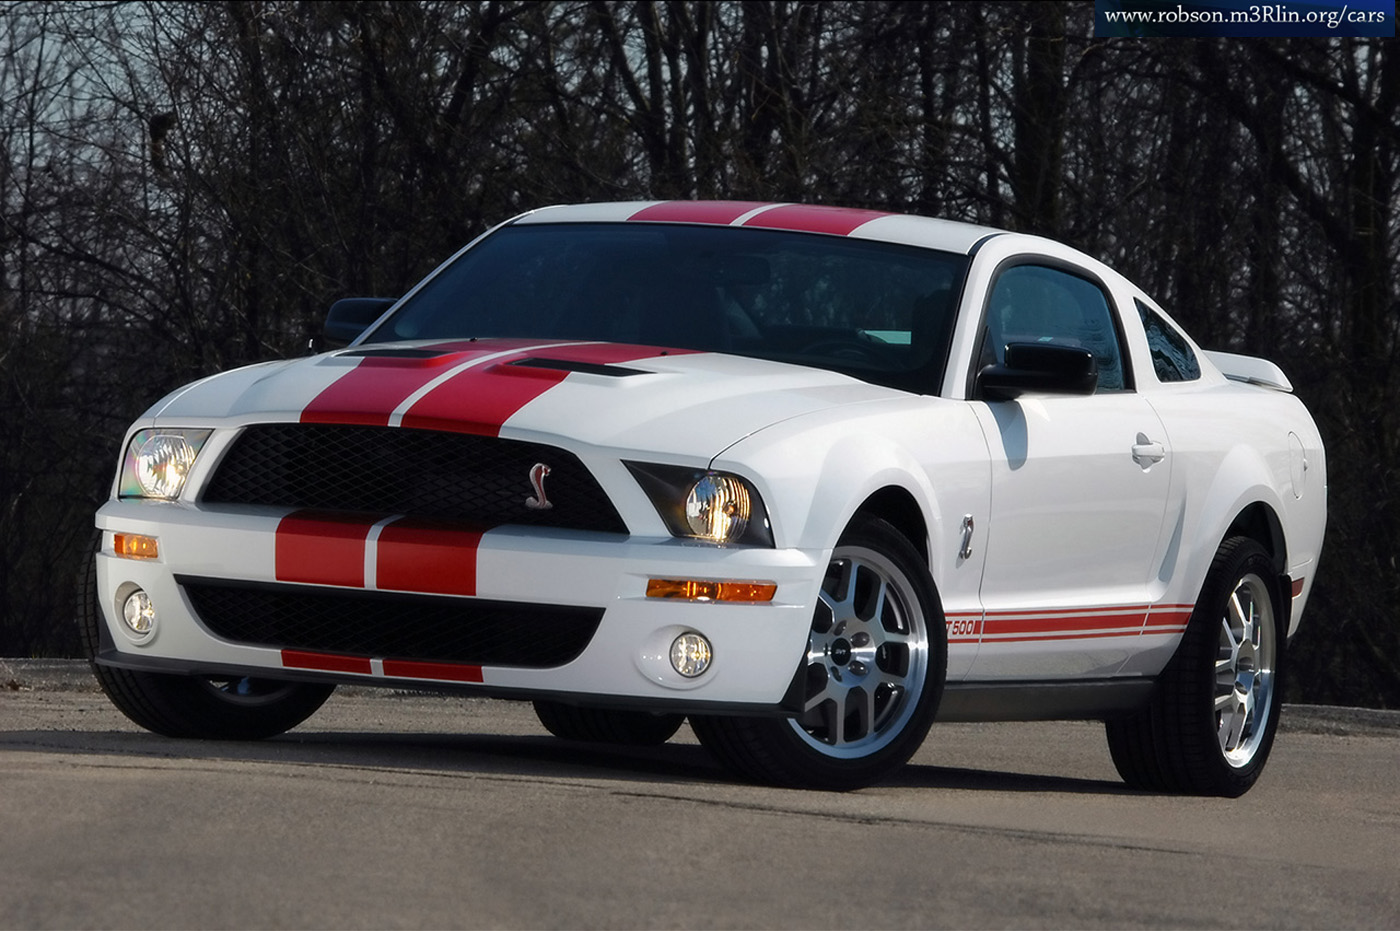 Ford Mustang Shelby Gt500 Cobra